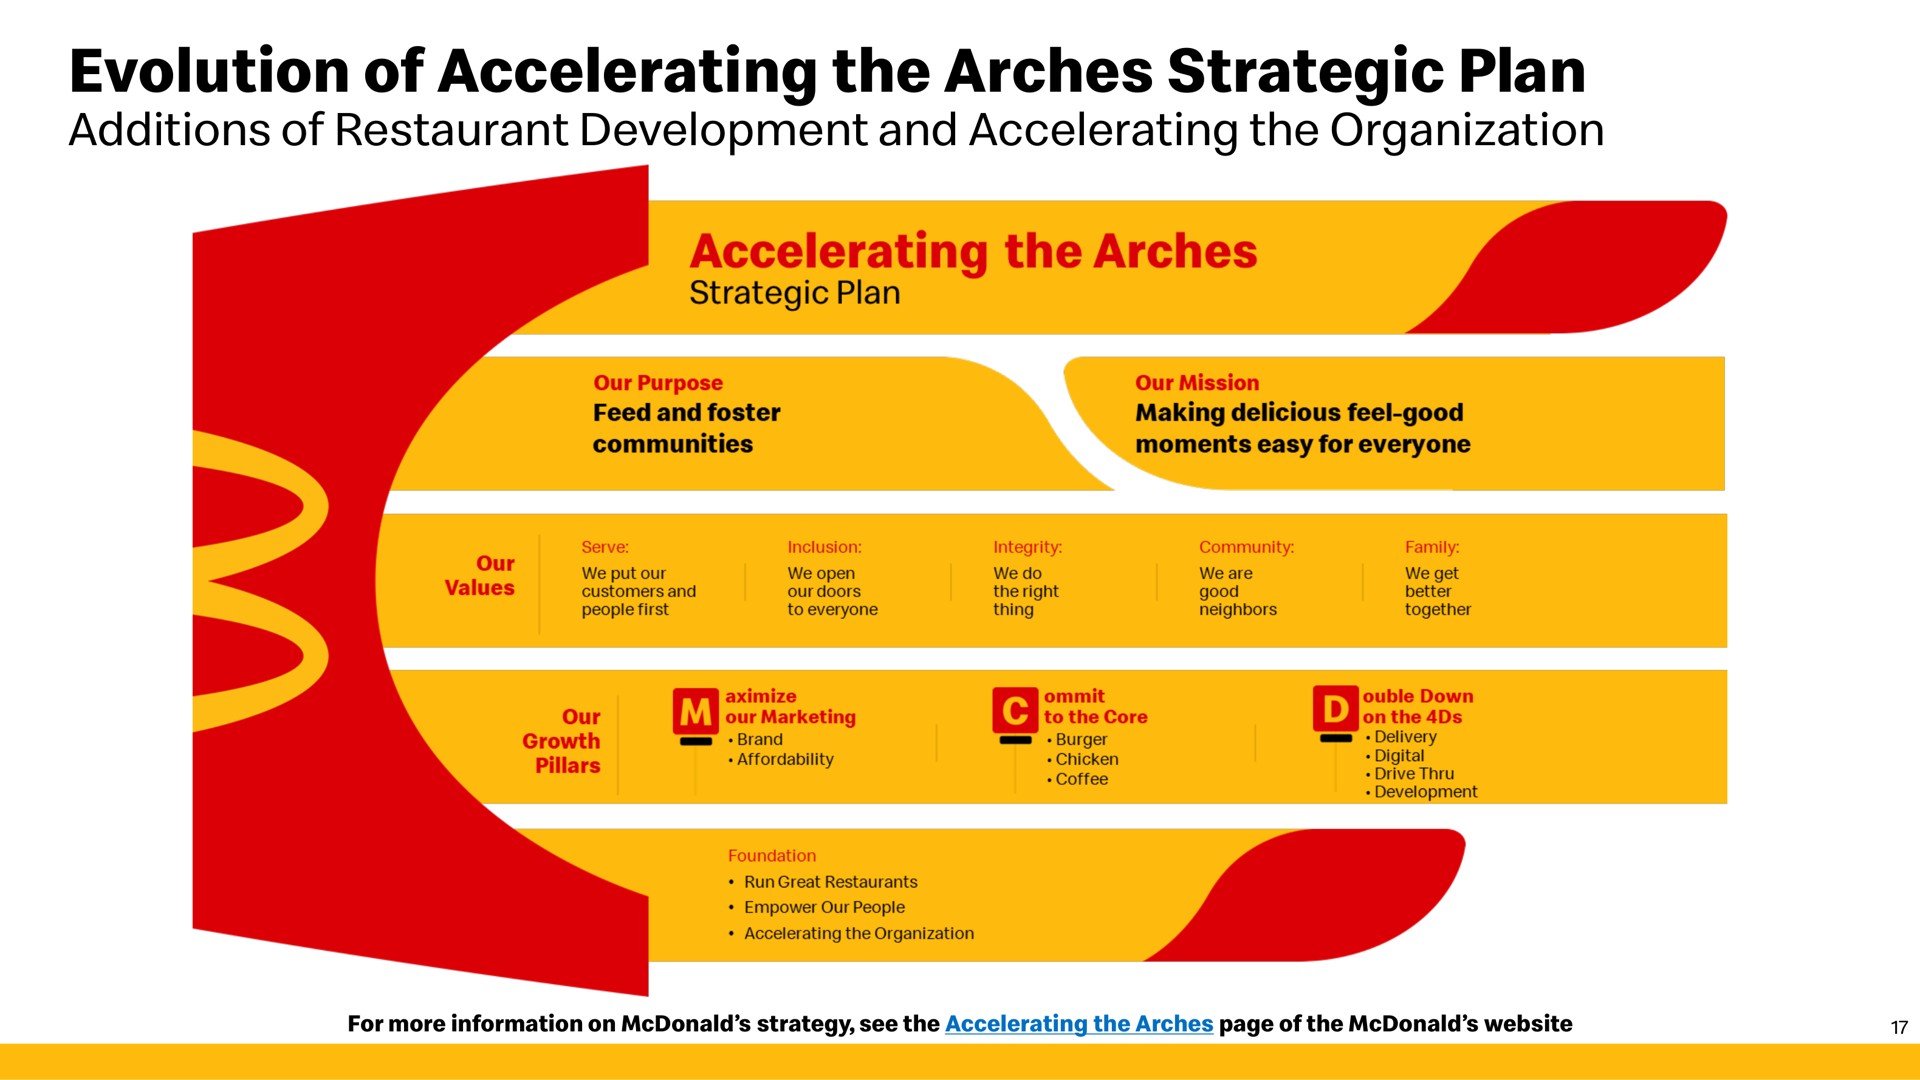 evolution of accelerating the arches strategic plan | McDonald's